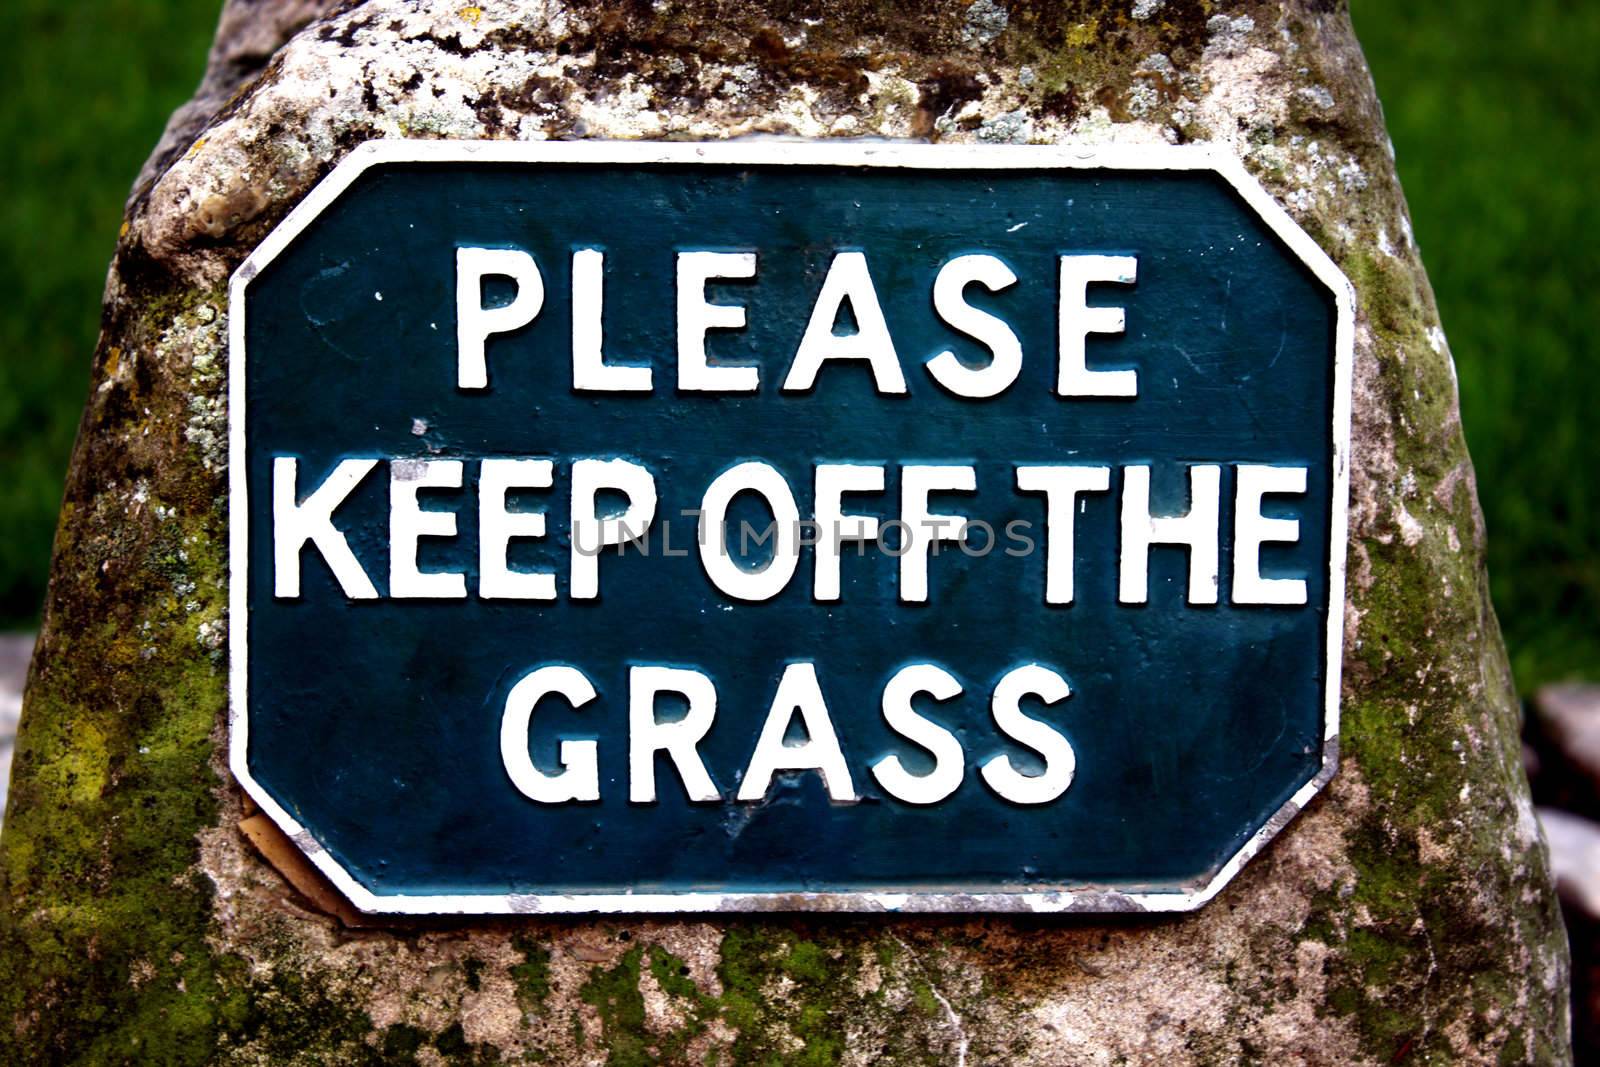 Please Keep Off The Grass by tommroch